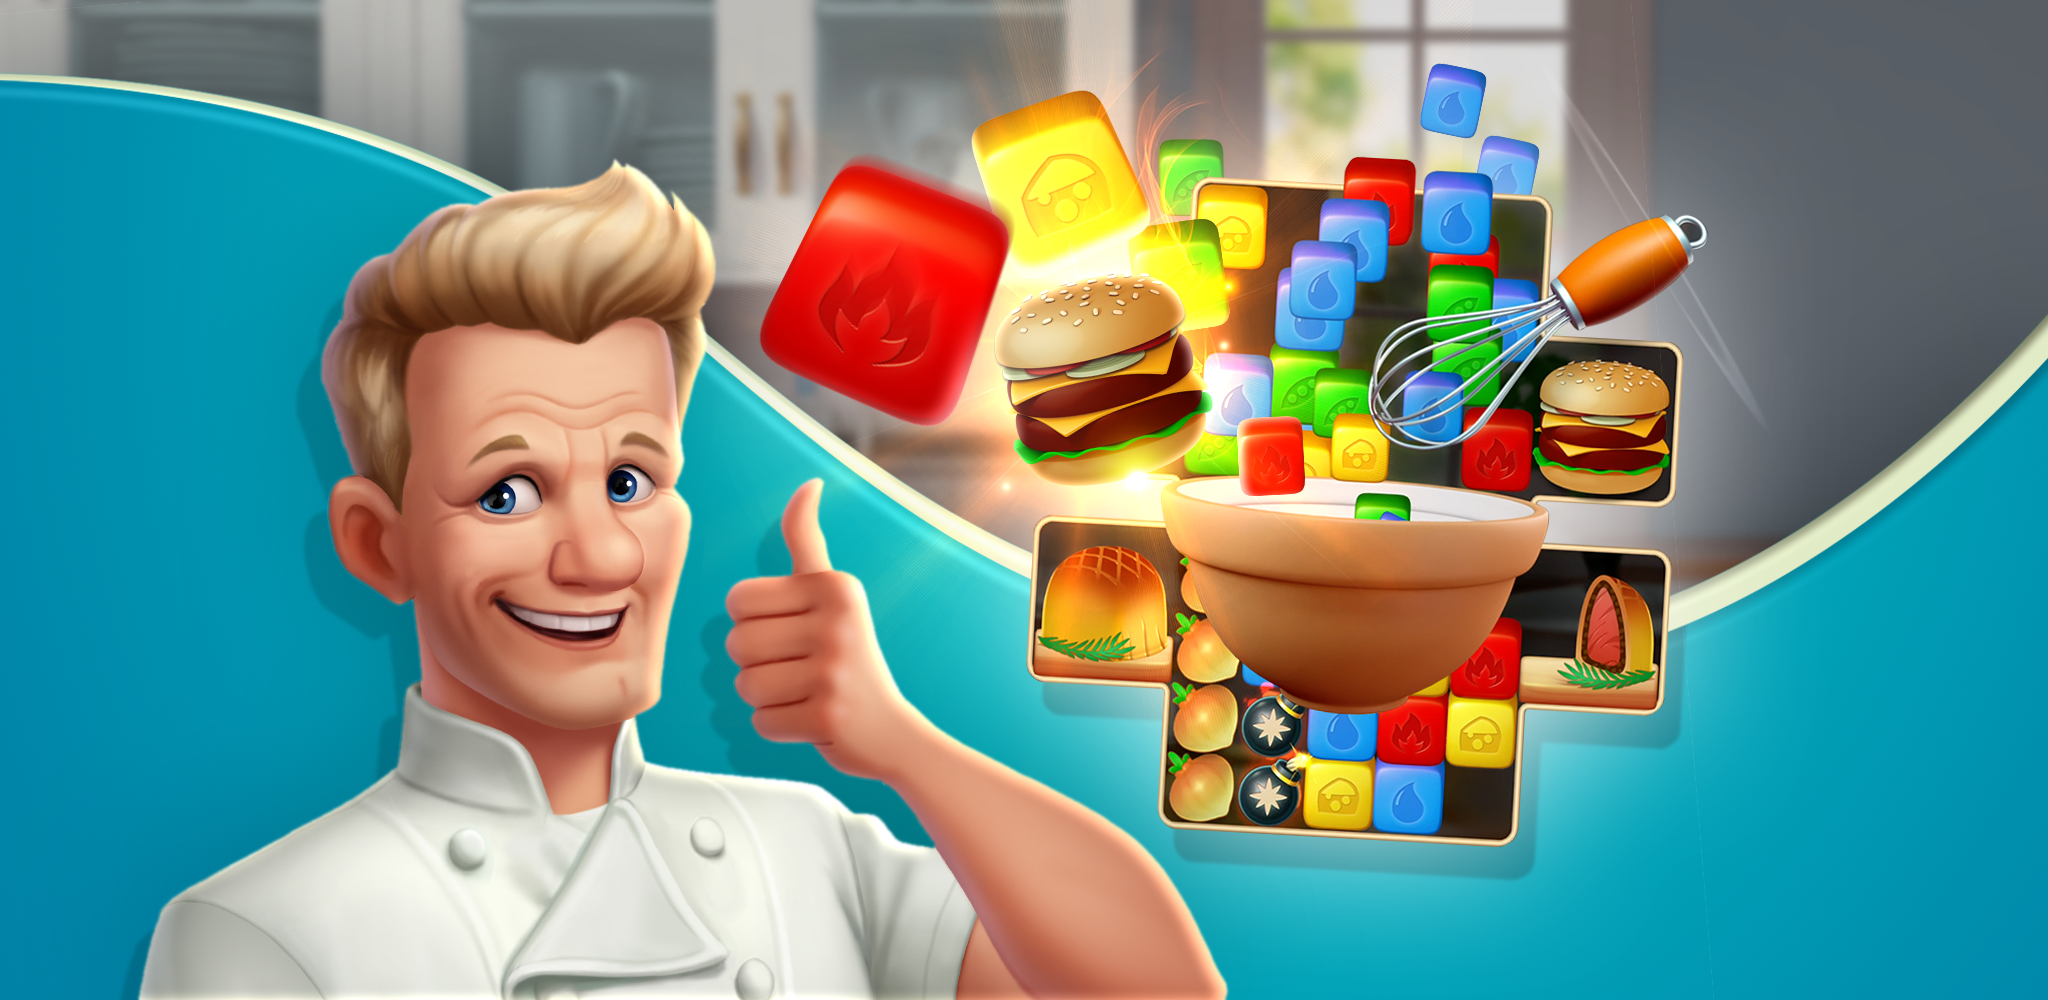 OUT NOW: Gordon Ramsay’s Chef Blast